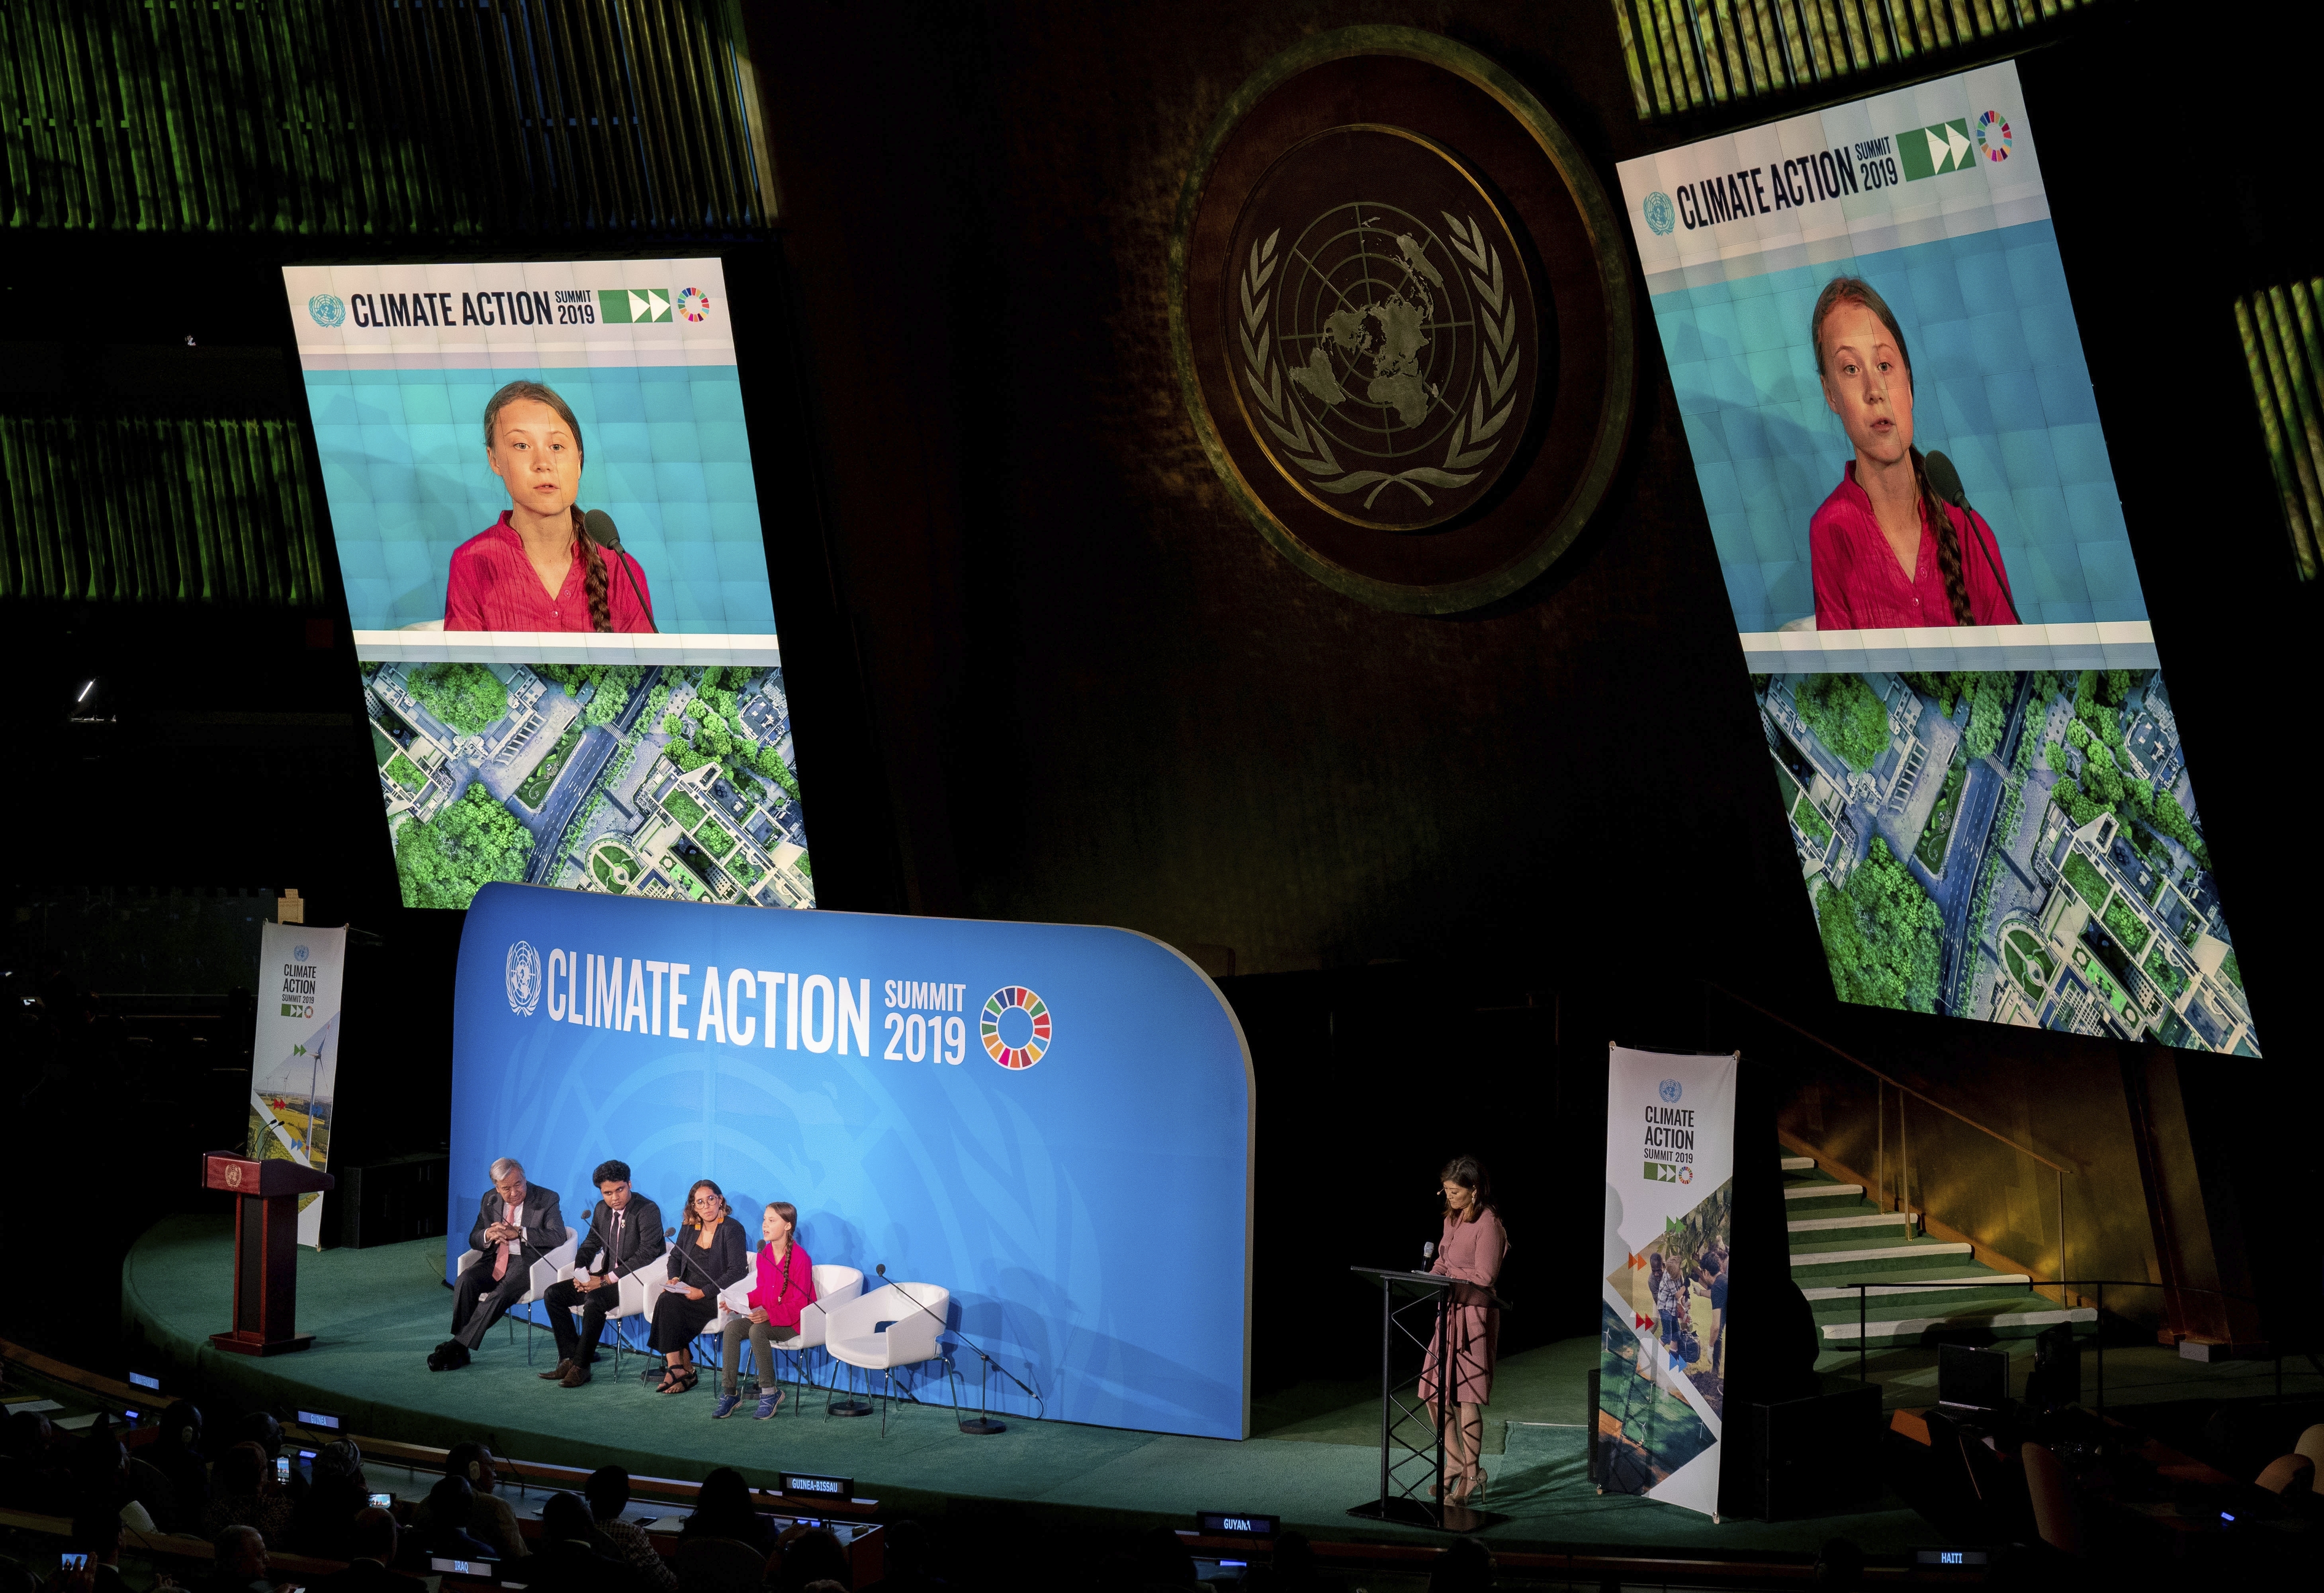 23 September 2019, US, New York: Greta Thunberg, climate activist and initiator of the environmental movement Fridays for Future, speaks at the UN climate summit at the United Nations. The United Nations expects more than 60 heads of state and government to present concrete, new plans to reduce CO2 emissions in short speeches lasting a maximum of three minutes. Photo by: Kay Nietfeld/picture-alliance/dpa/AP Images